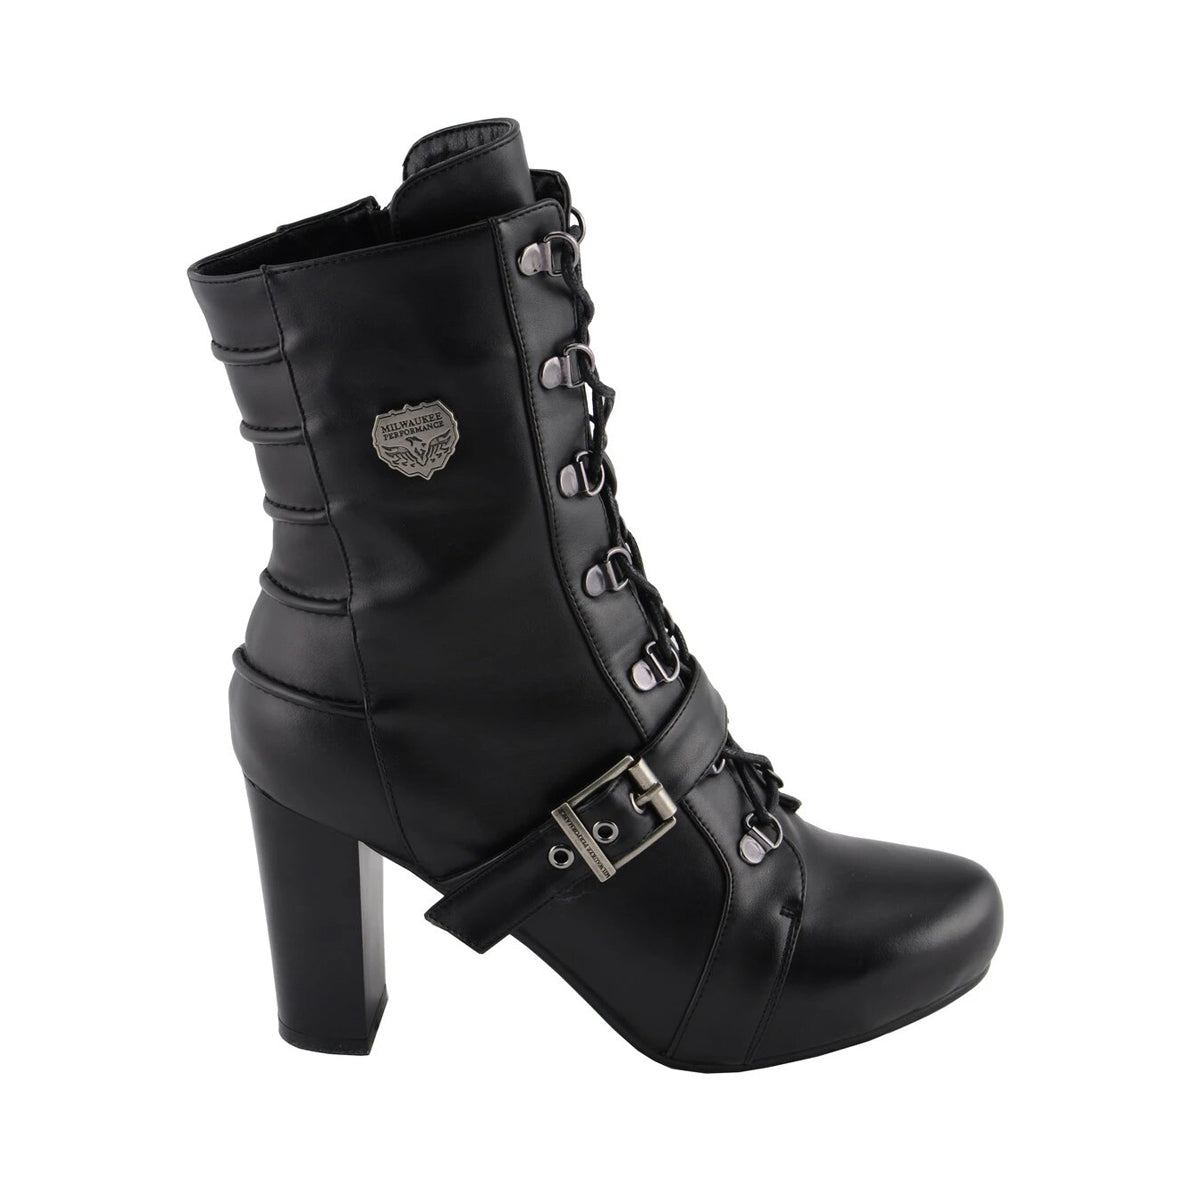 Womens Black Lace-Up Boots with Block Heel and Buckle Strap